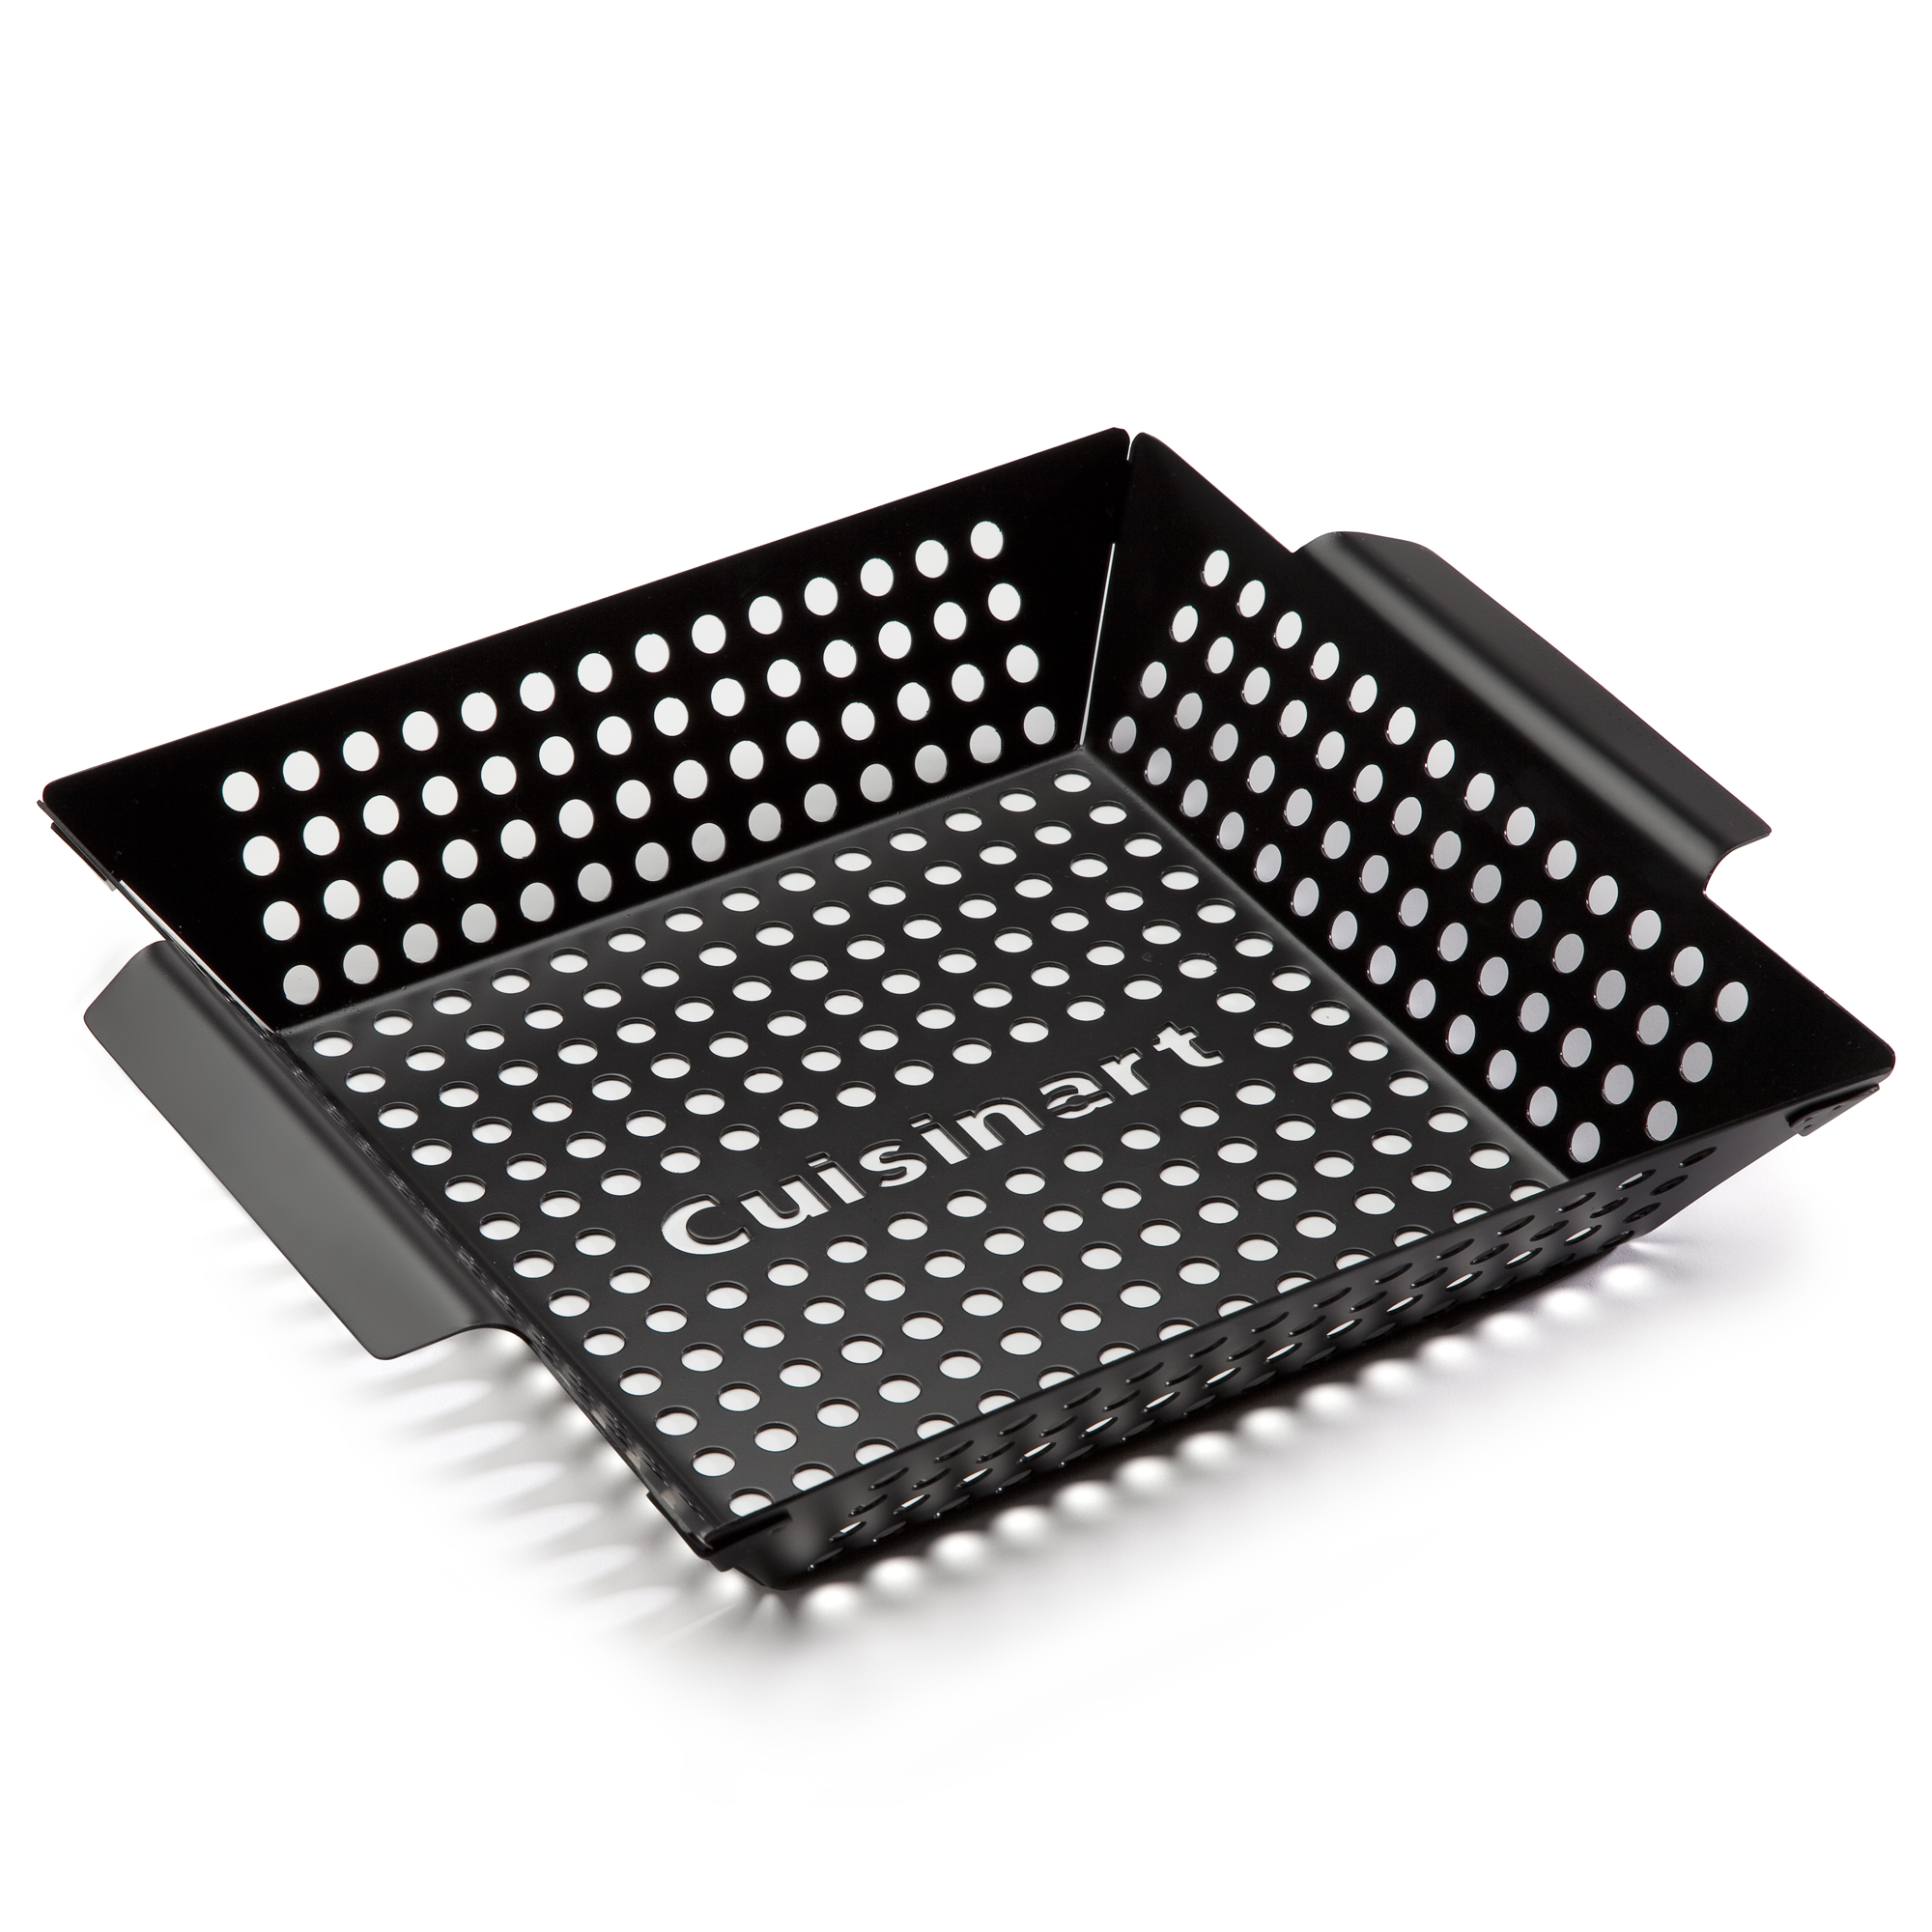 Cuisinart® Non-Stick Grill Wok - 11 Inch x 11 Inch, Grilling Basket, Perfect for Seafood and Vegetables - image 1 of 3